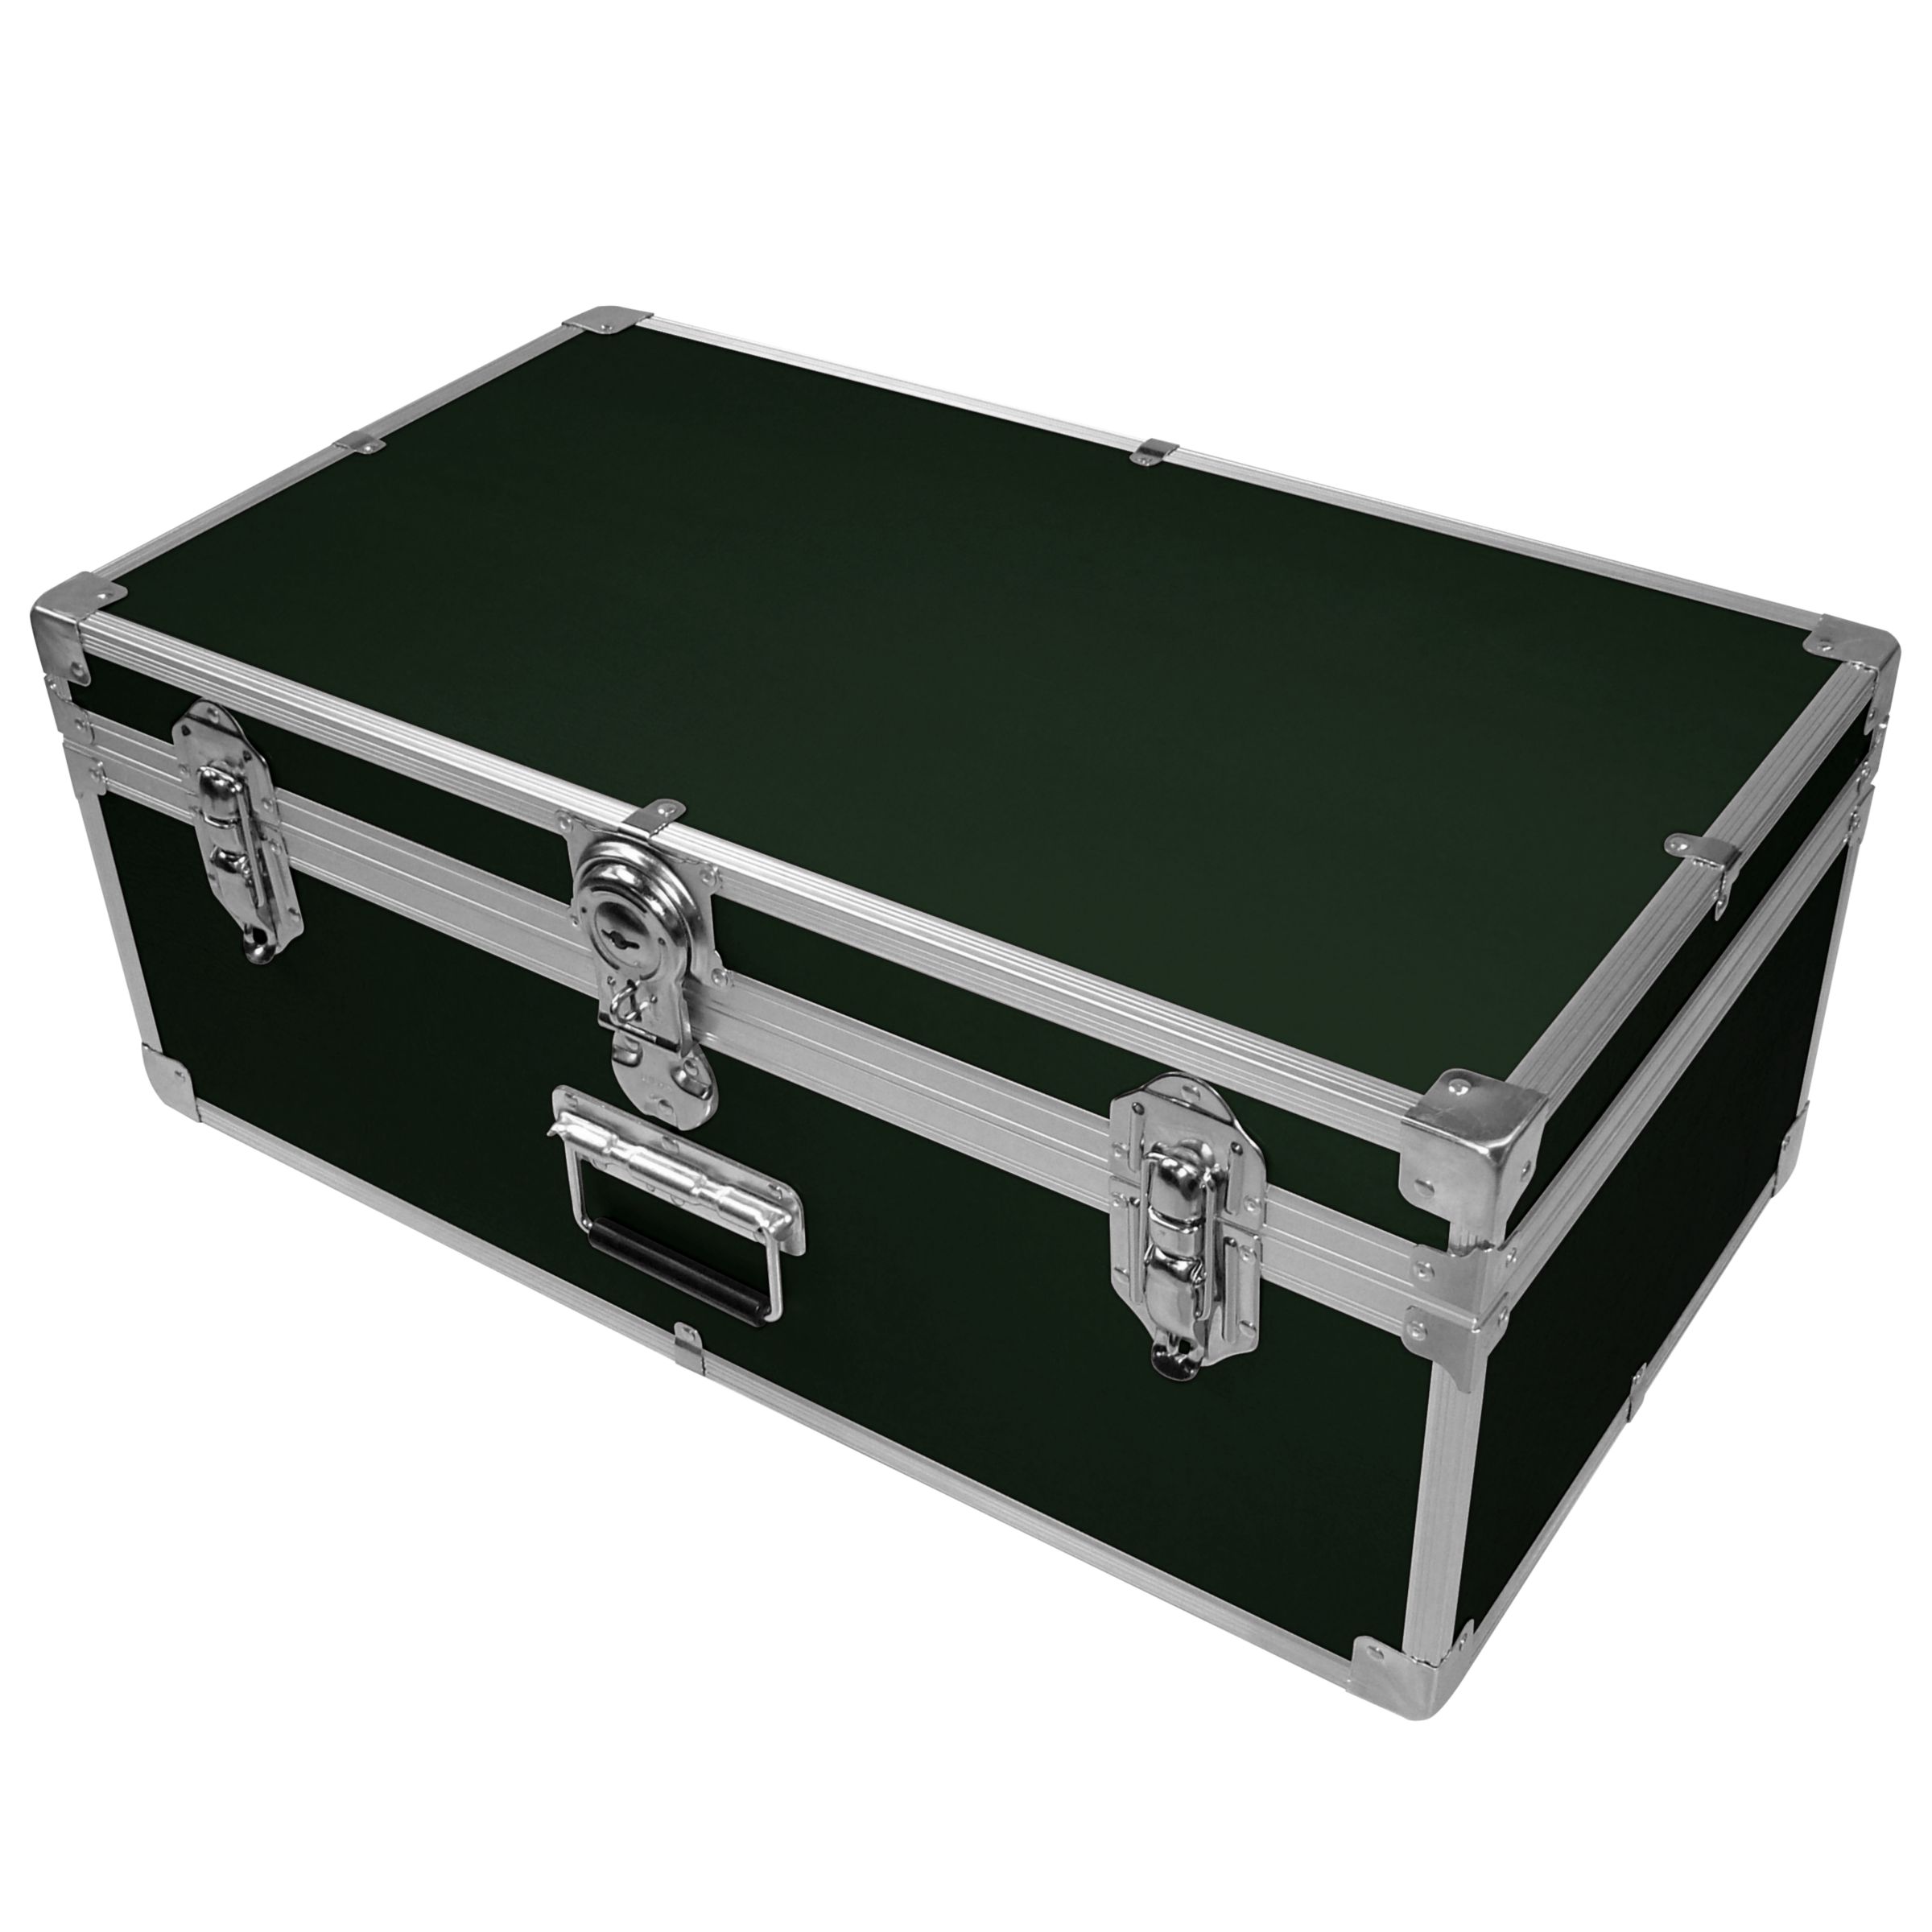 John Lewis Fortified Attache Trunk, Green at JohnLewis